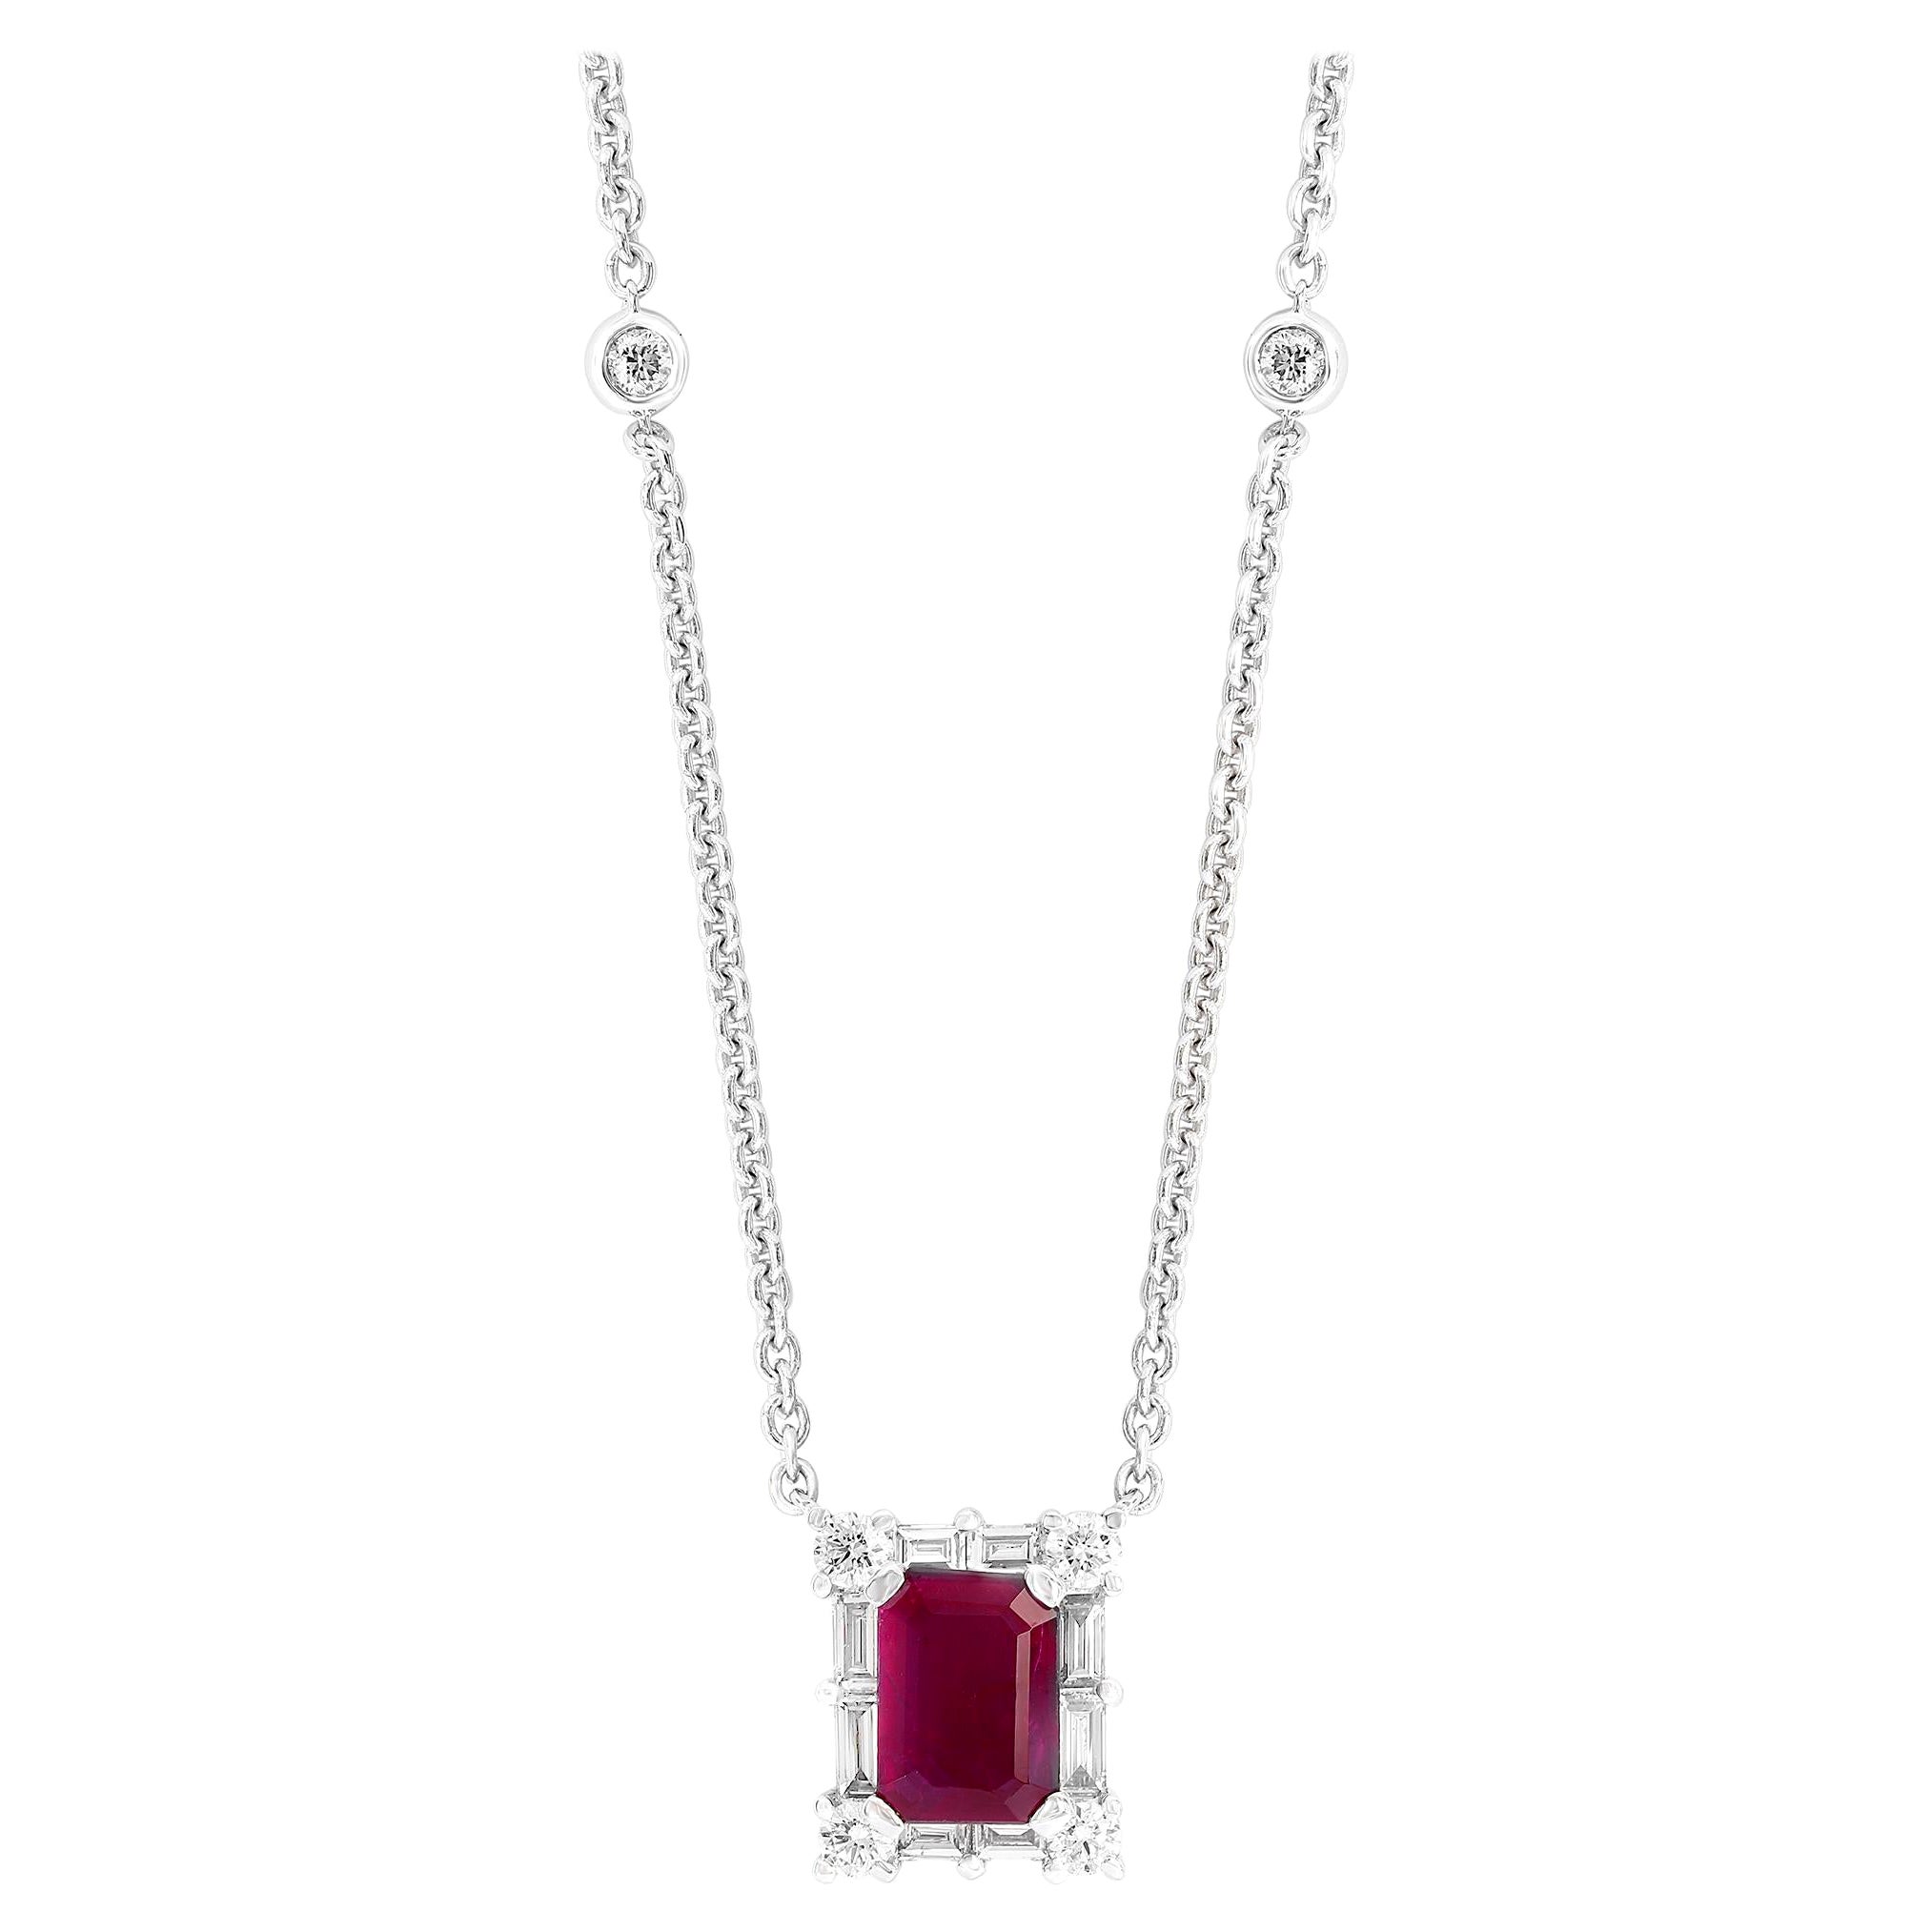 0.77 Carat Emerald Cut Ruby and Diamond Pendant Necklace in 18K White Gold For Sale